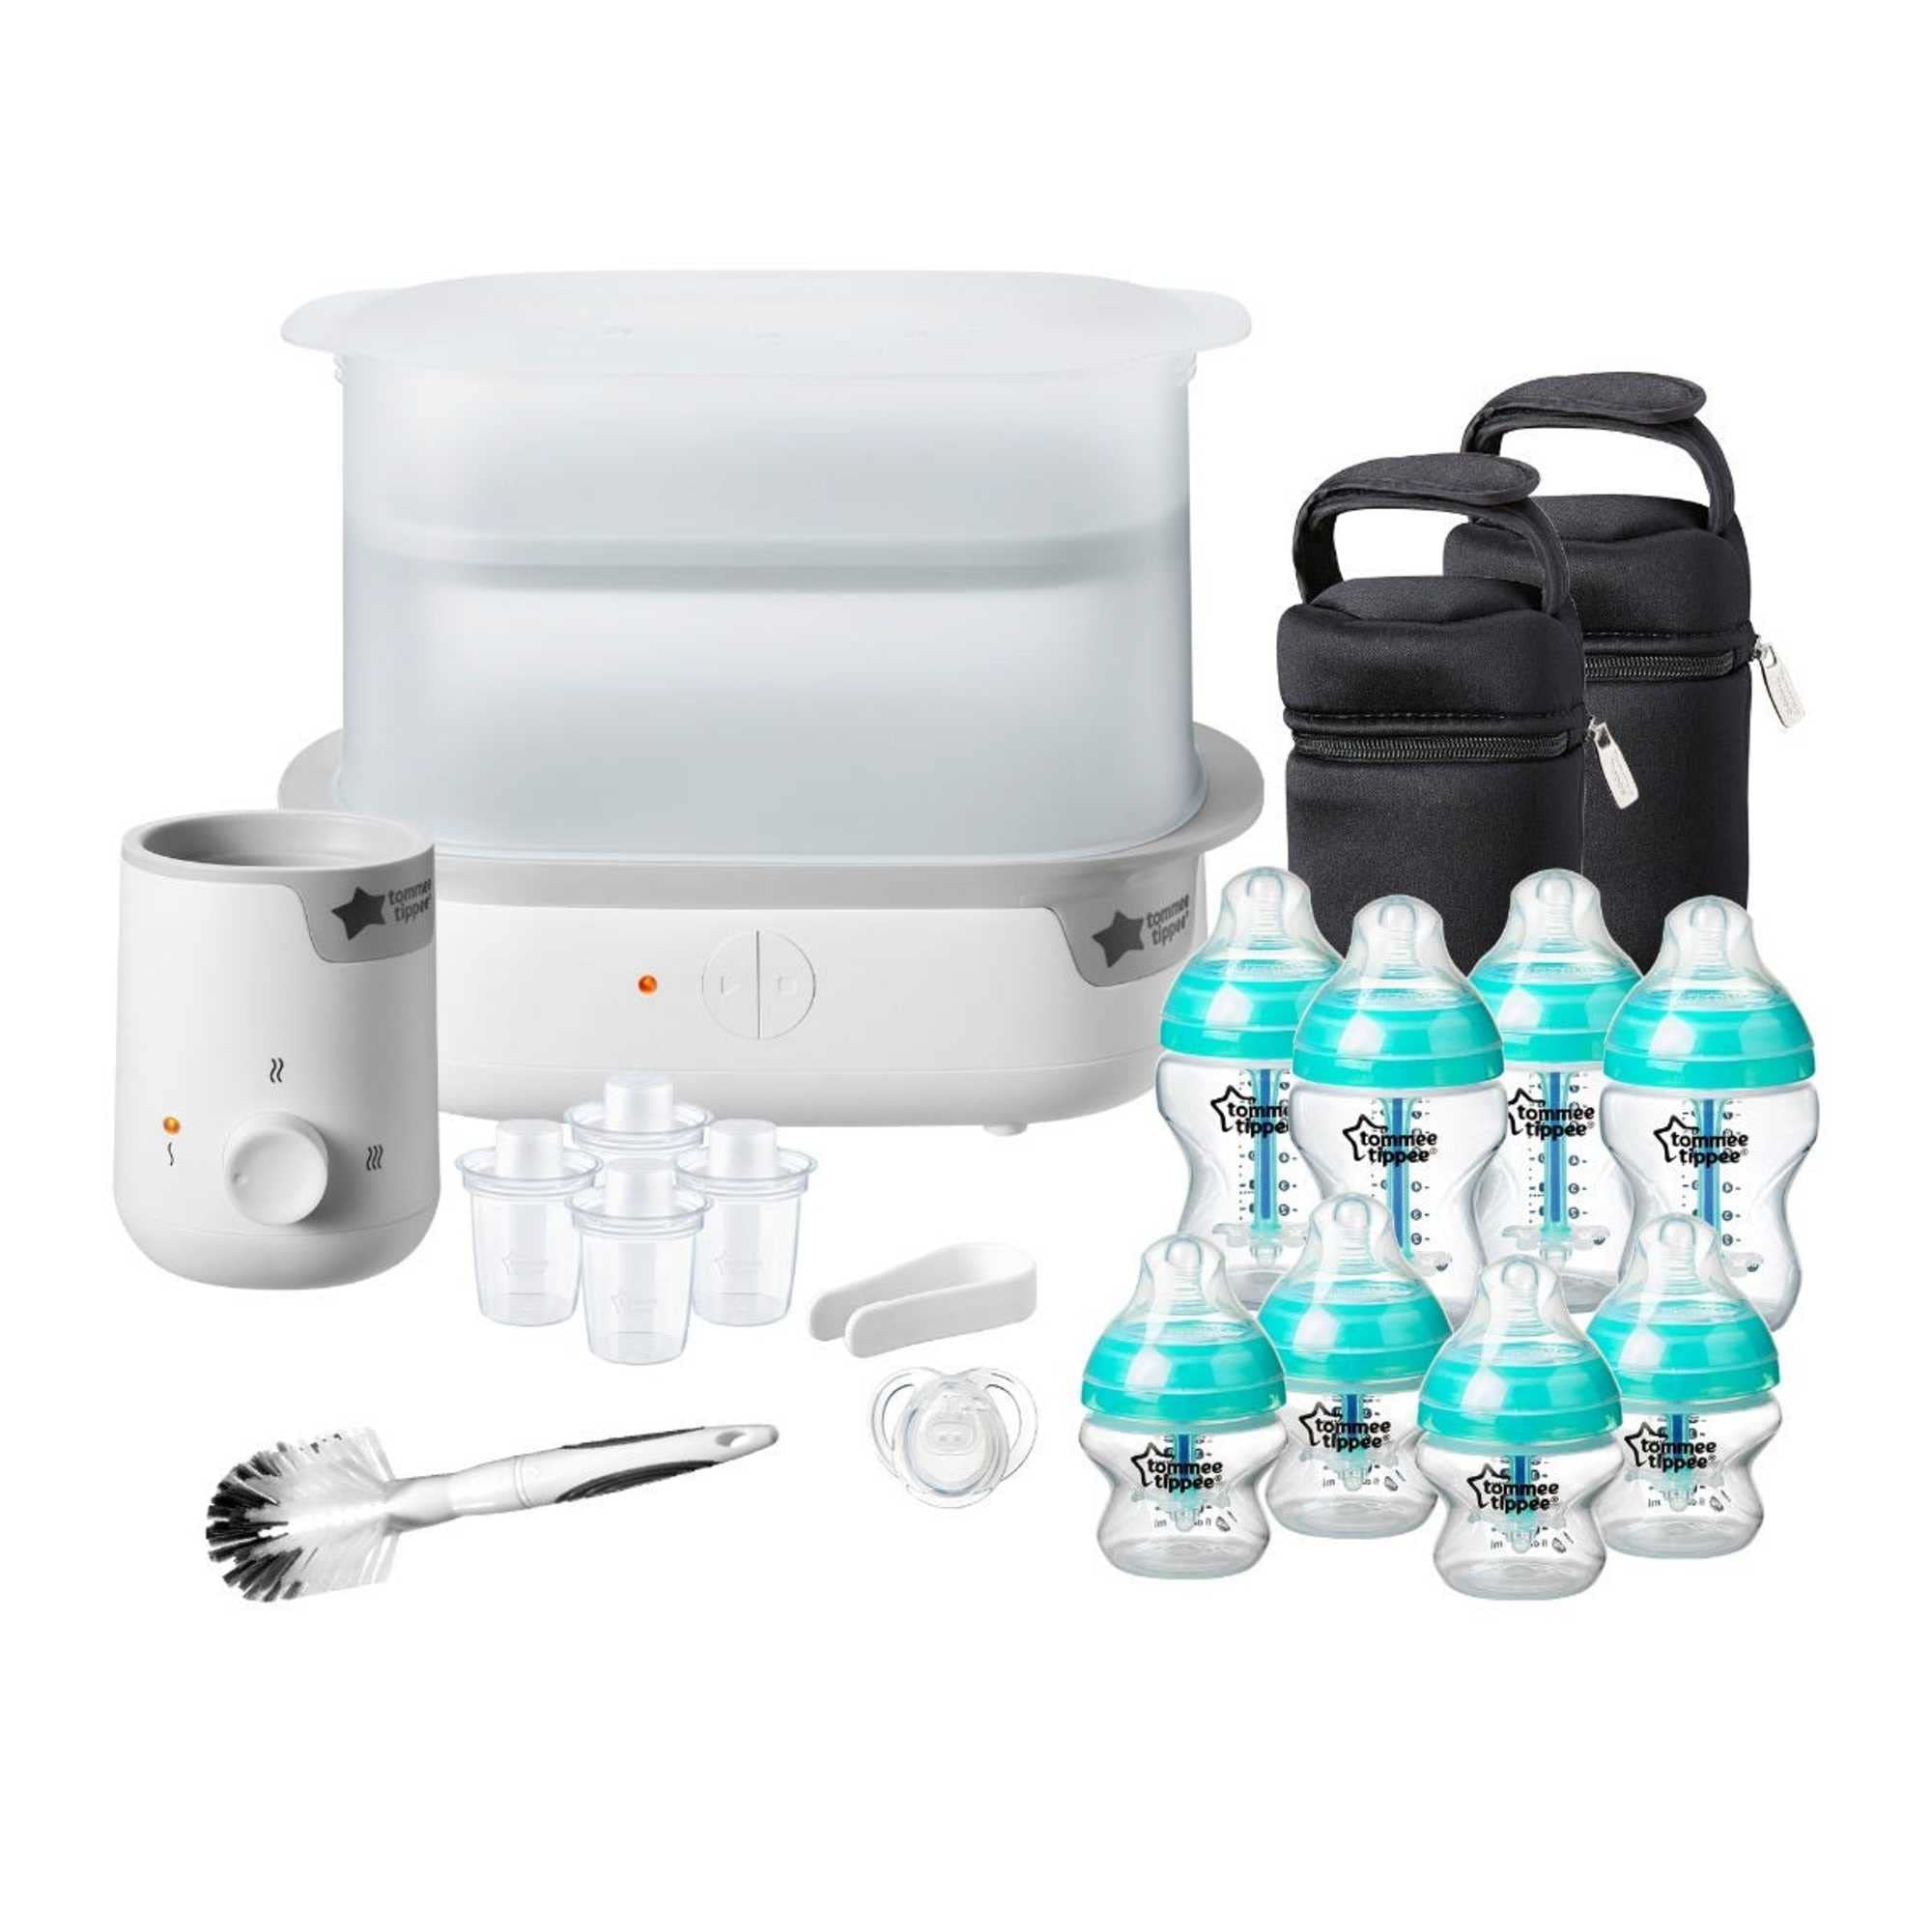 Tommee Tippee Anti-Colic Complete Feeding Set, Super-Steam Electric Steriliser, Baby Bottle and Food Warmer, Baby Bottles and Accessories